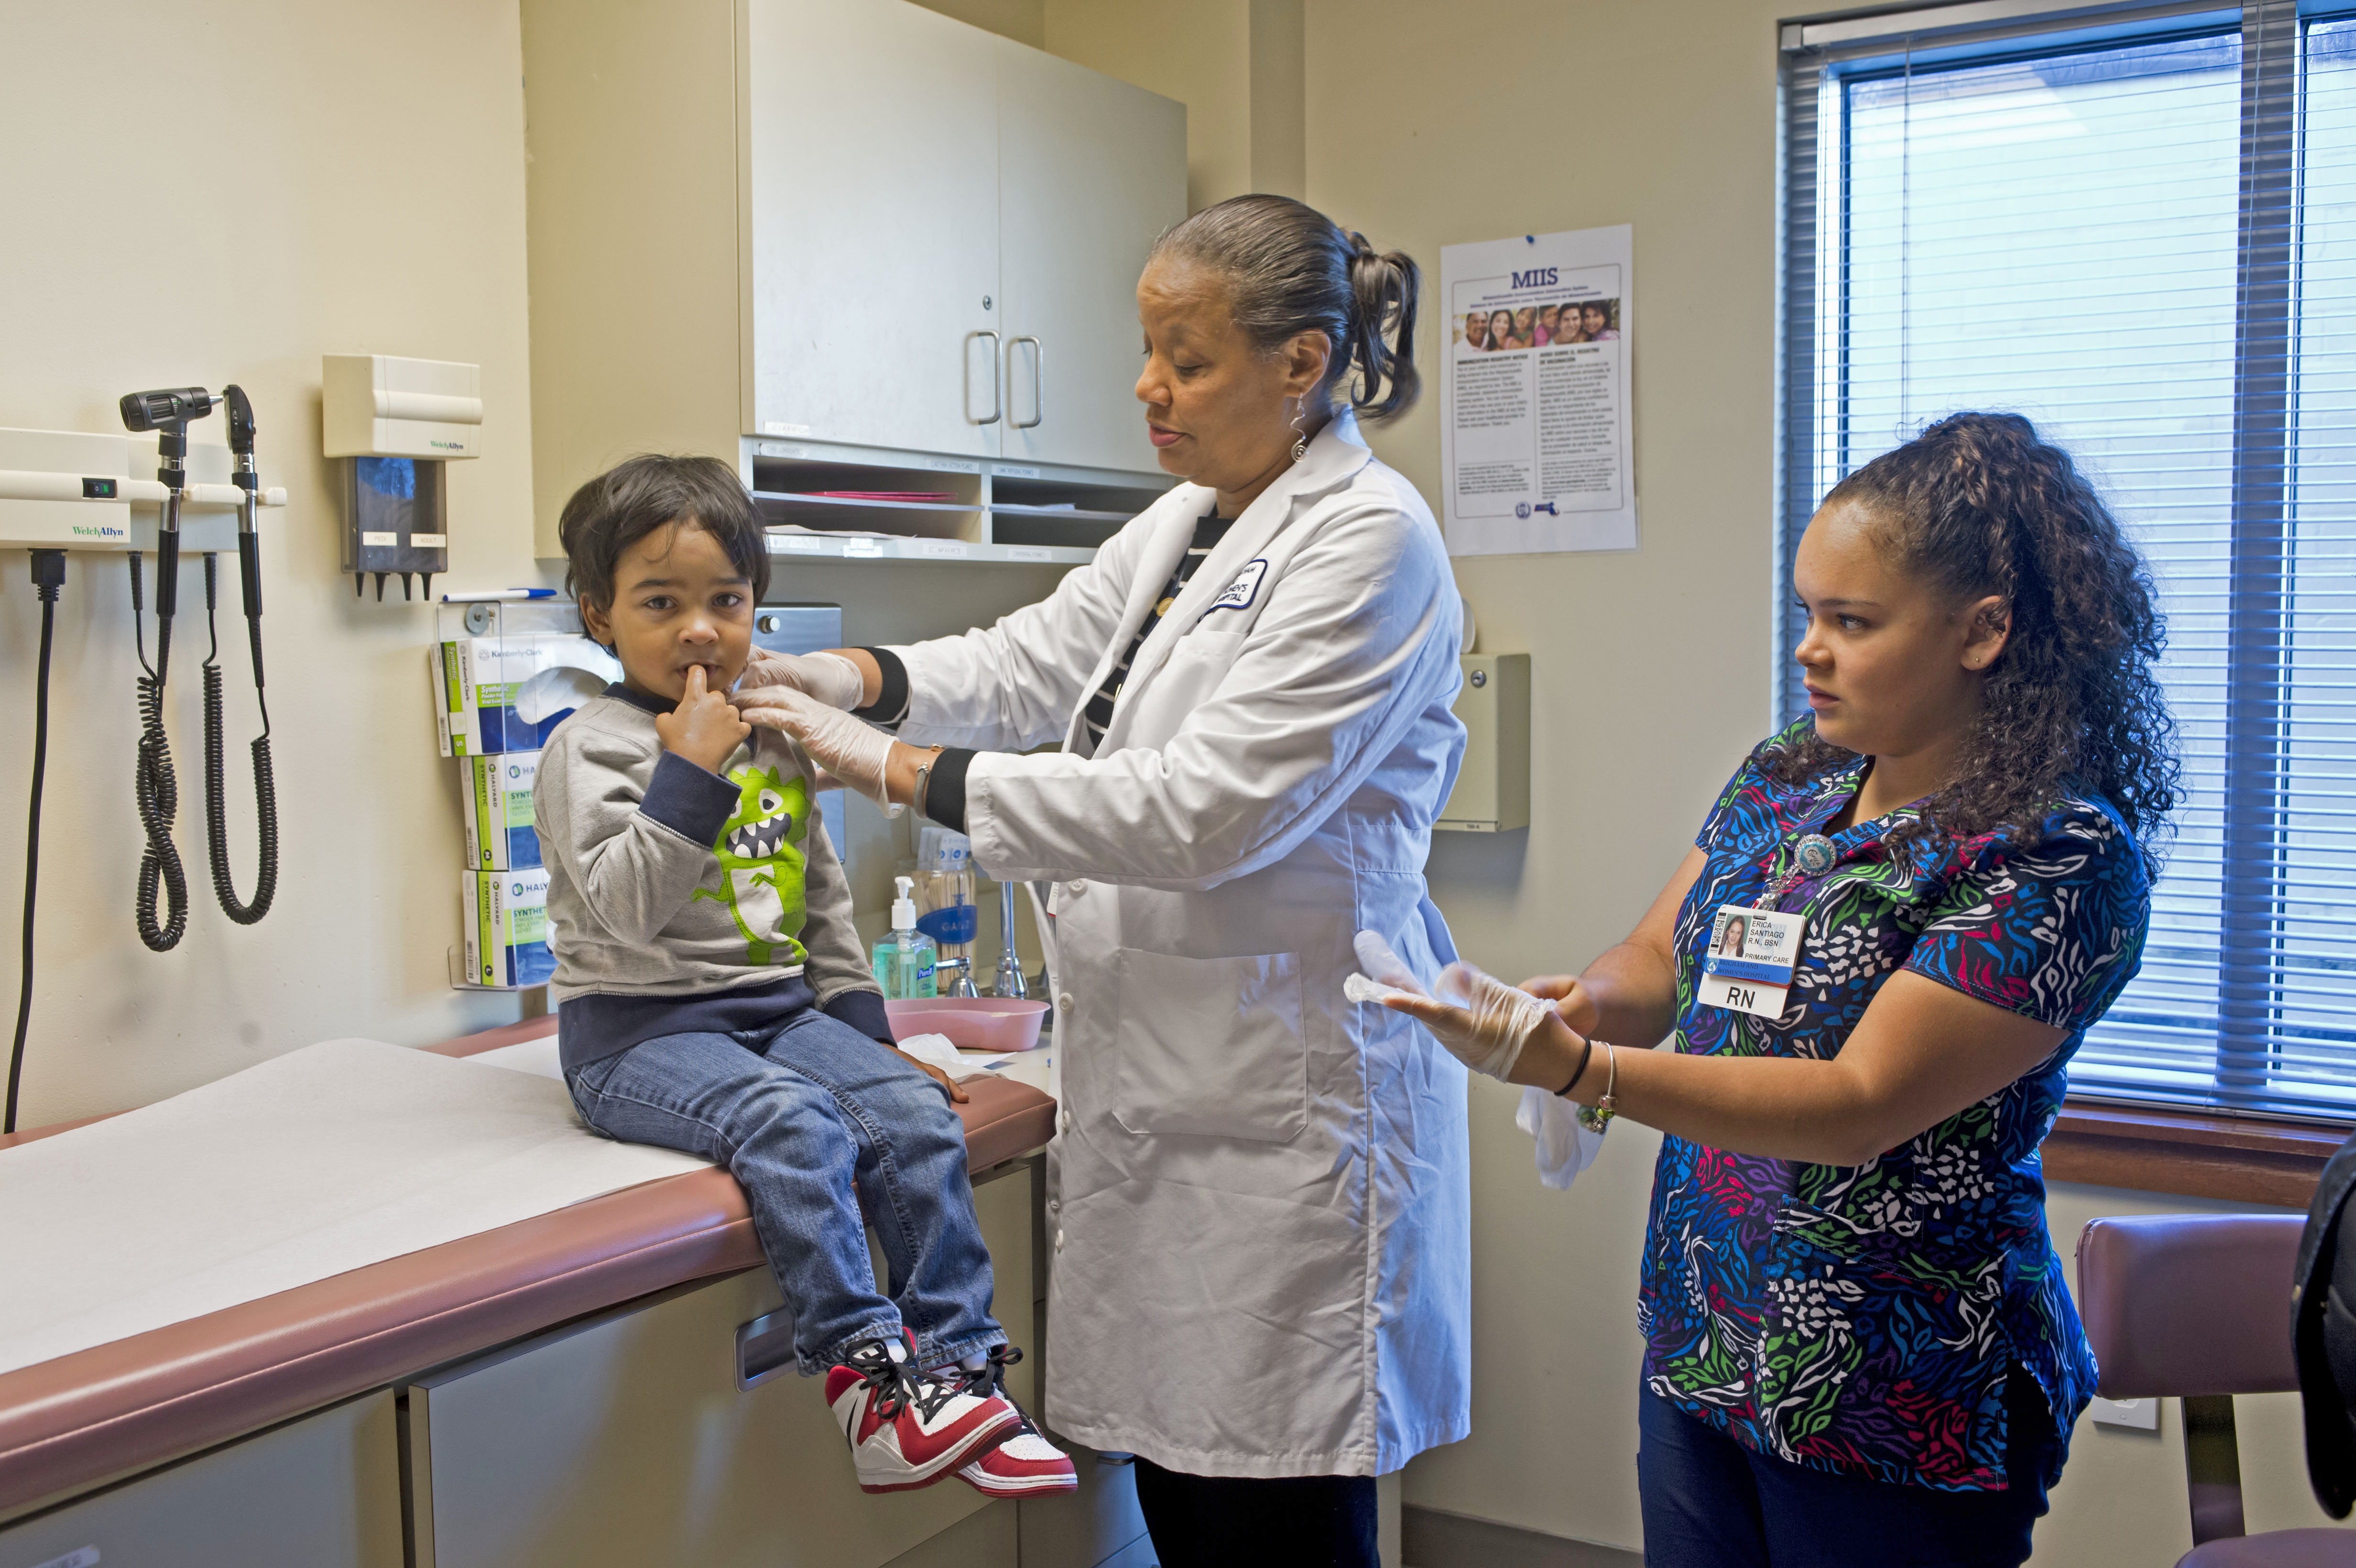 From left: A young patient at Southern Jamaica Plain Health Center is cared for by Regina Harvey and Erica Santiago.